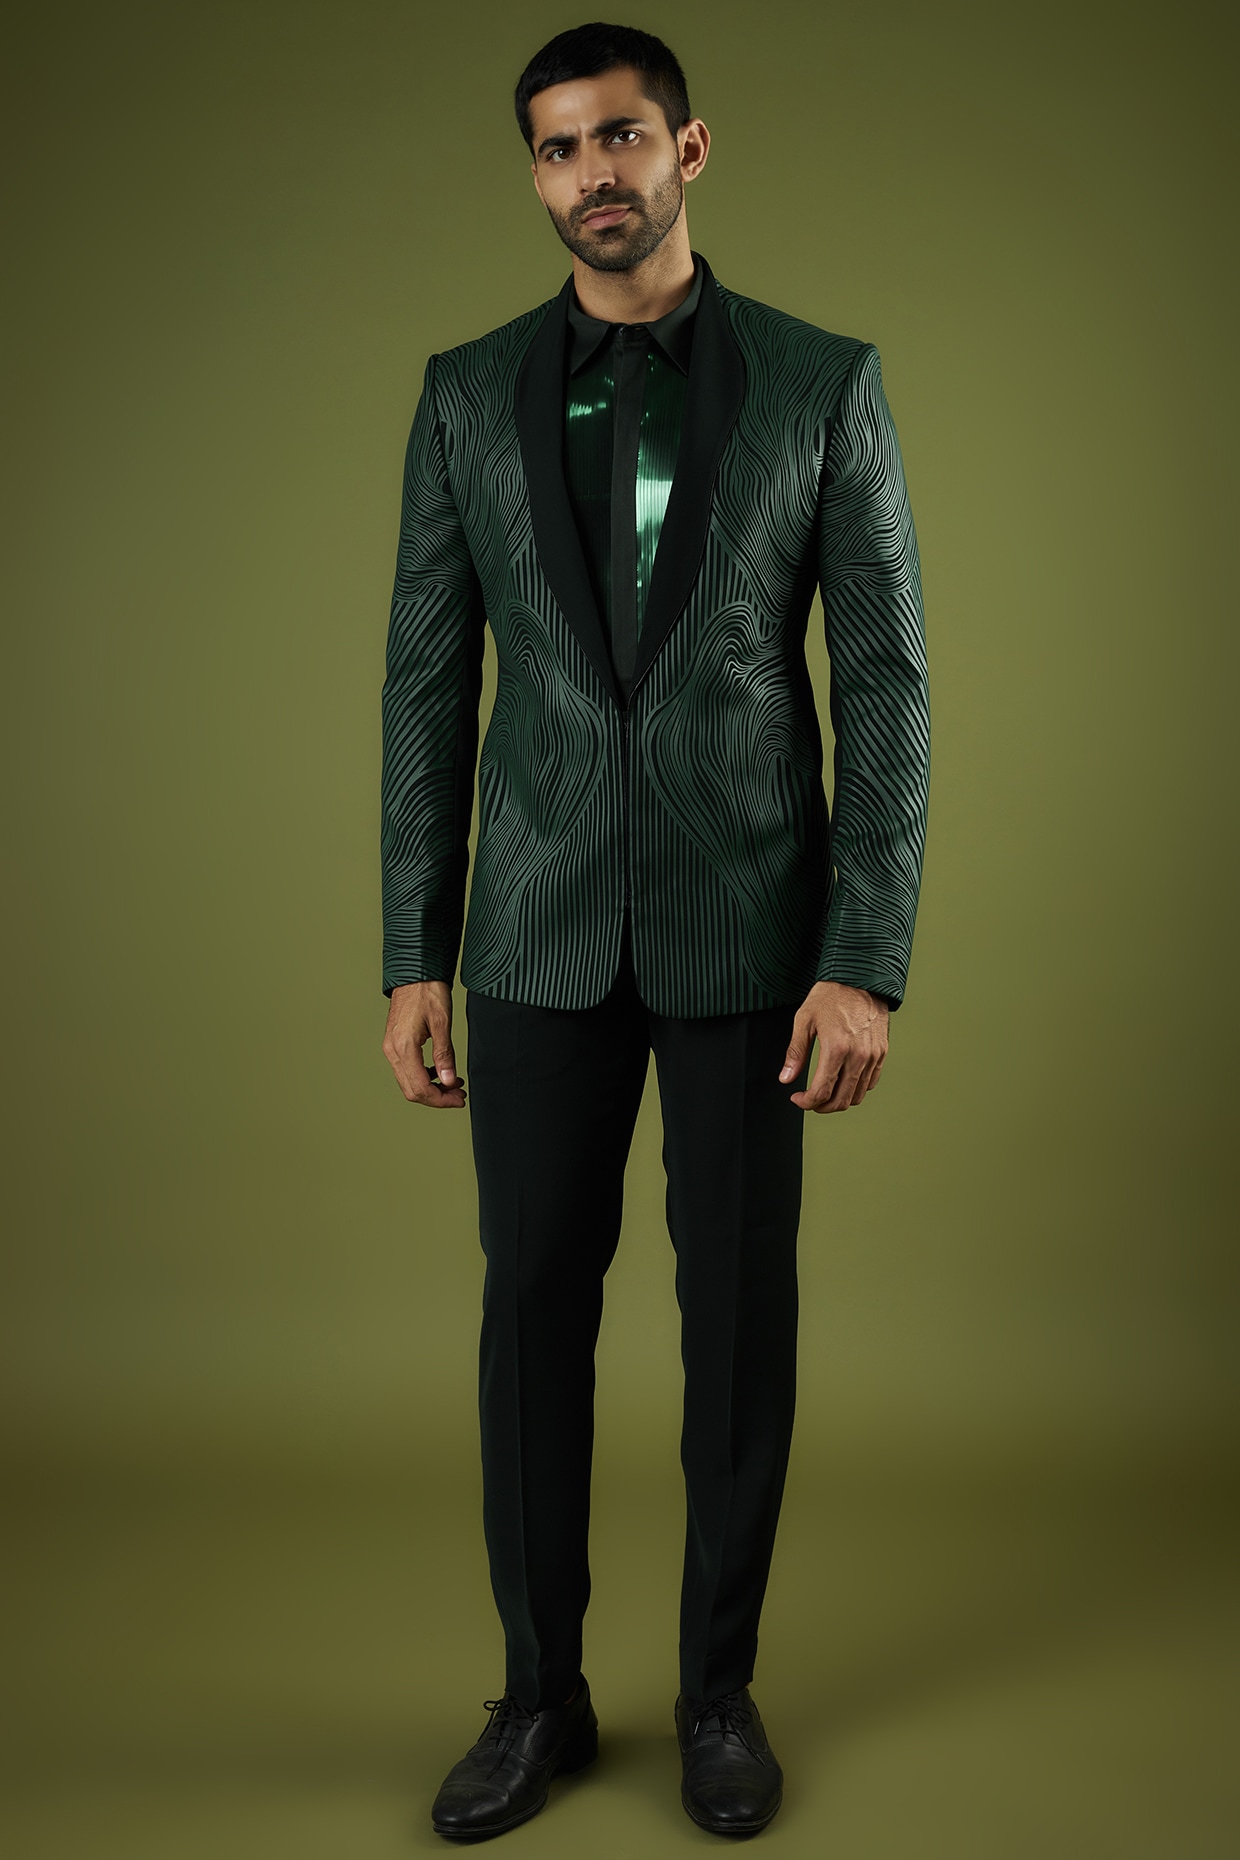 wear green suits | Prom suits, Mens outfits, Well dressed men